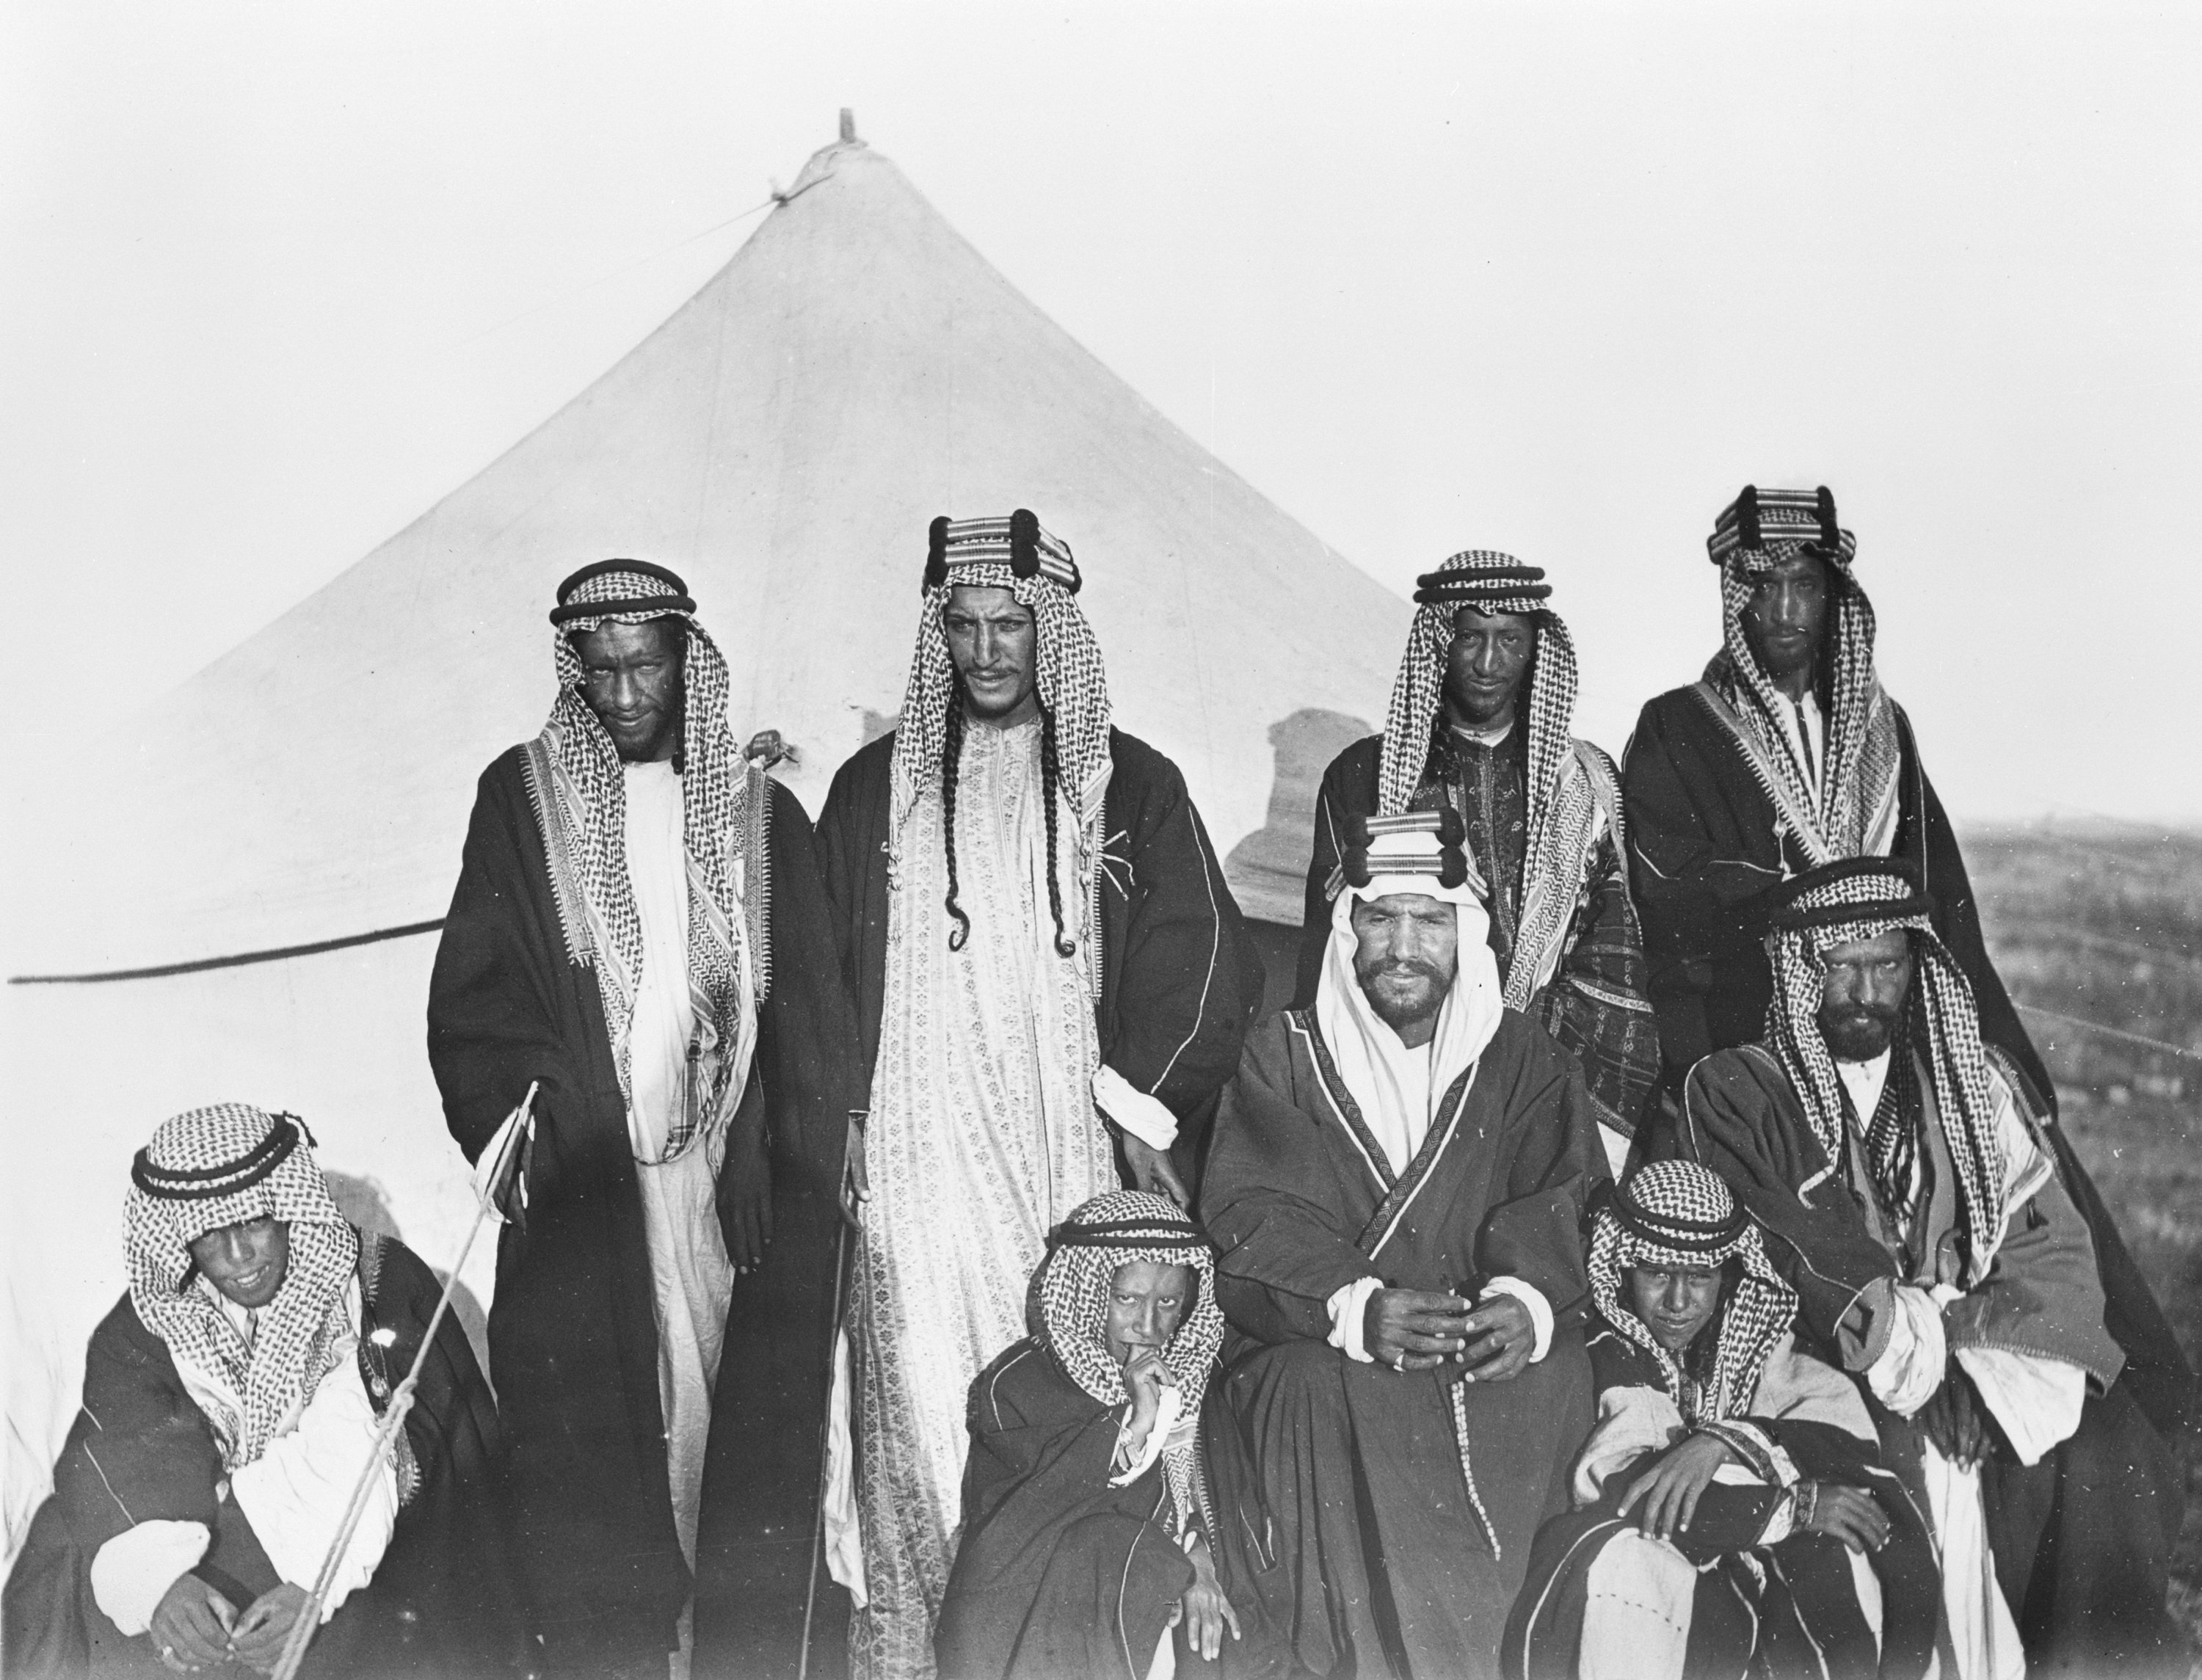 Abdulaziz bin Abdul Rahman Al Saud, standing second from left, with brothers and sons near Thaj, Saudi Arabia, photographed by British envoy Captain William Shakespear, March 11, 1911. (Getty Images)